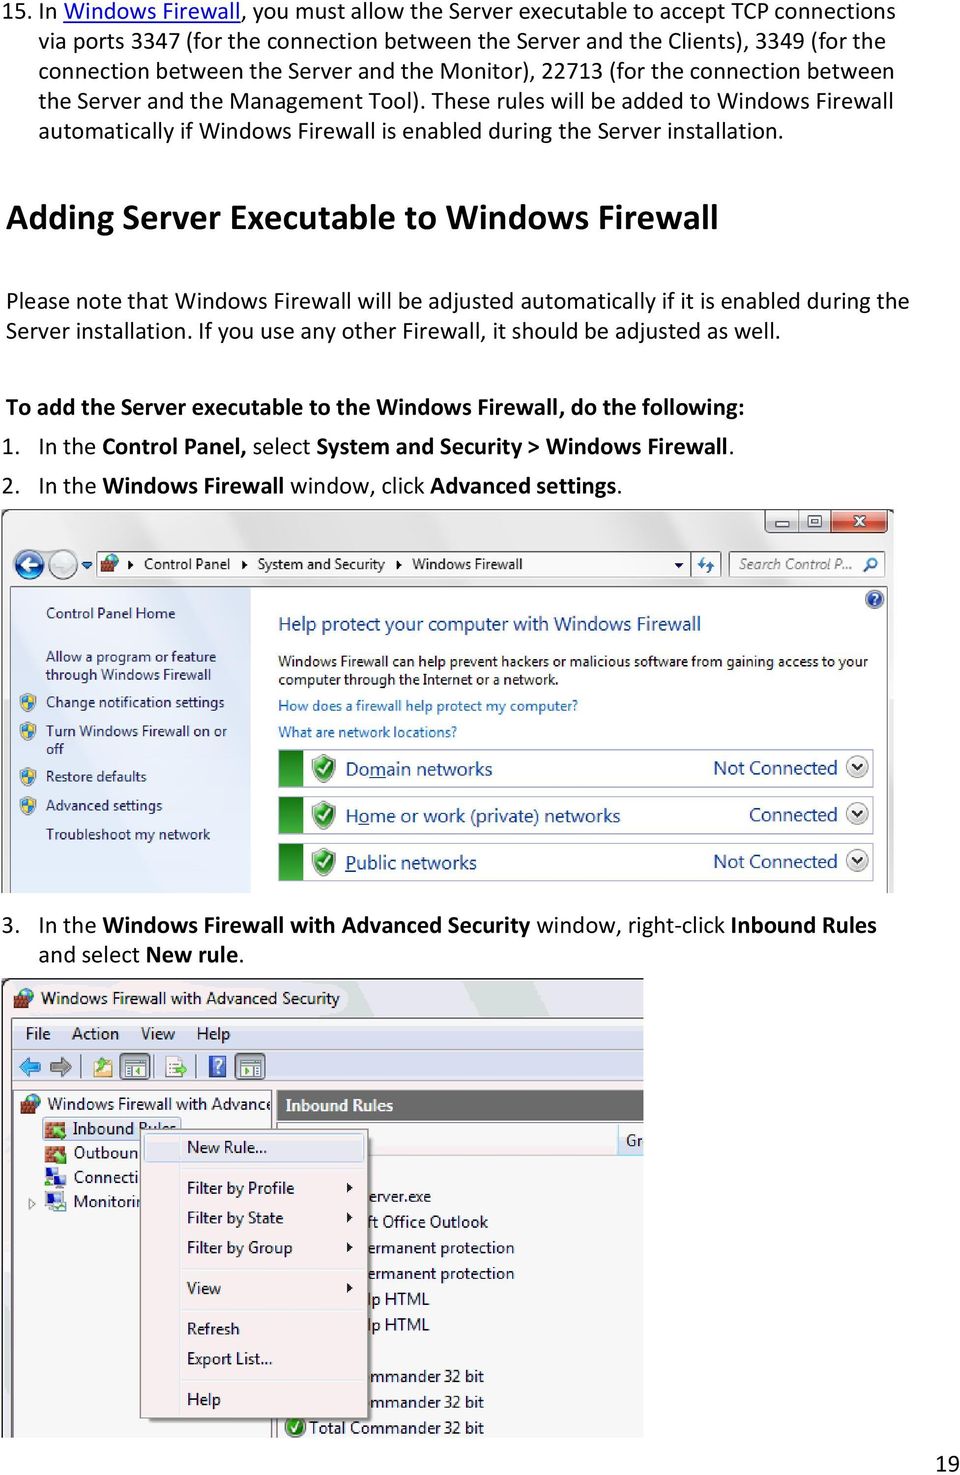 These rules will be added to Windows Firewall automatically if Windows Firewall is enabled during the Server installation.